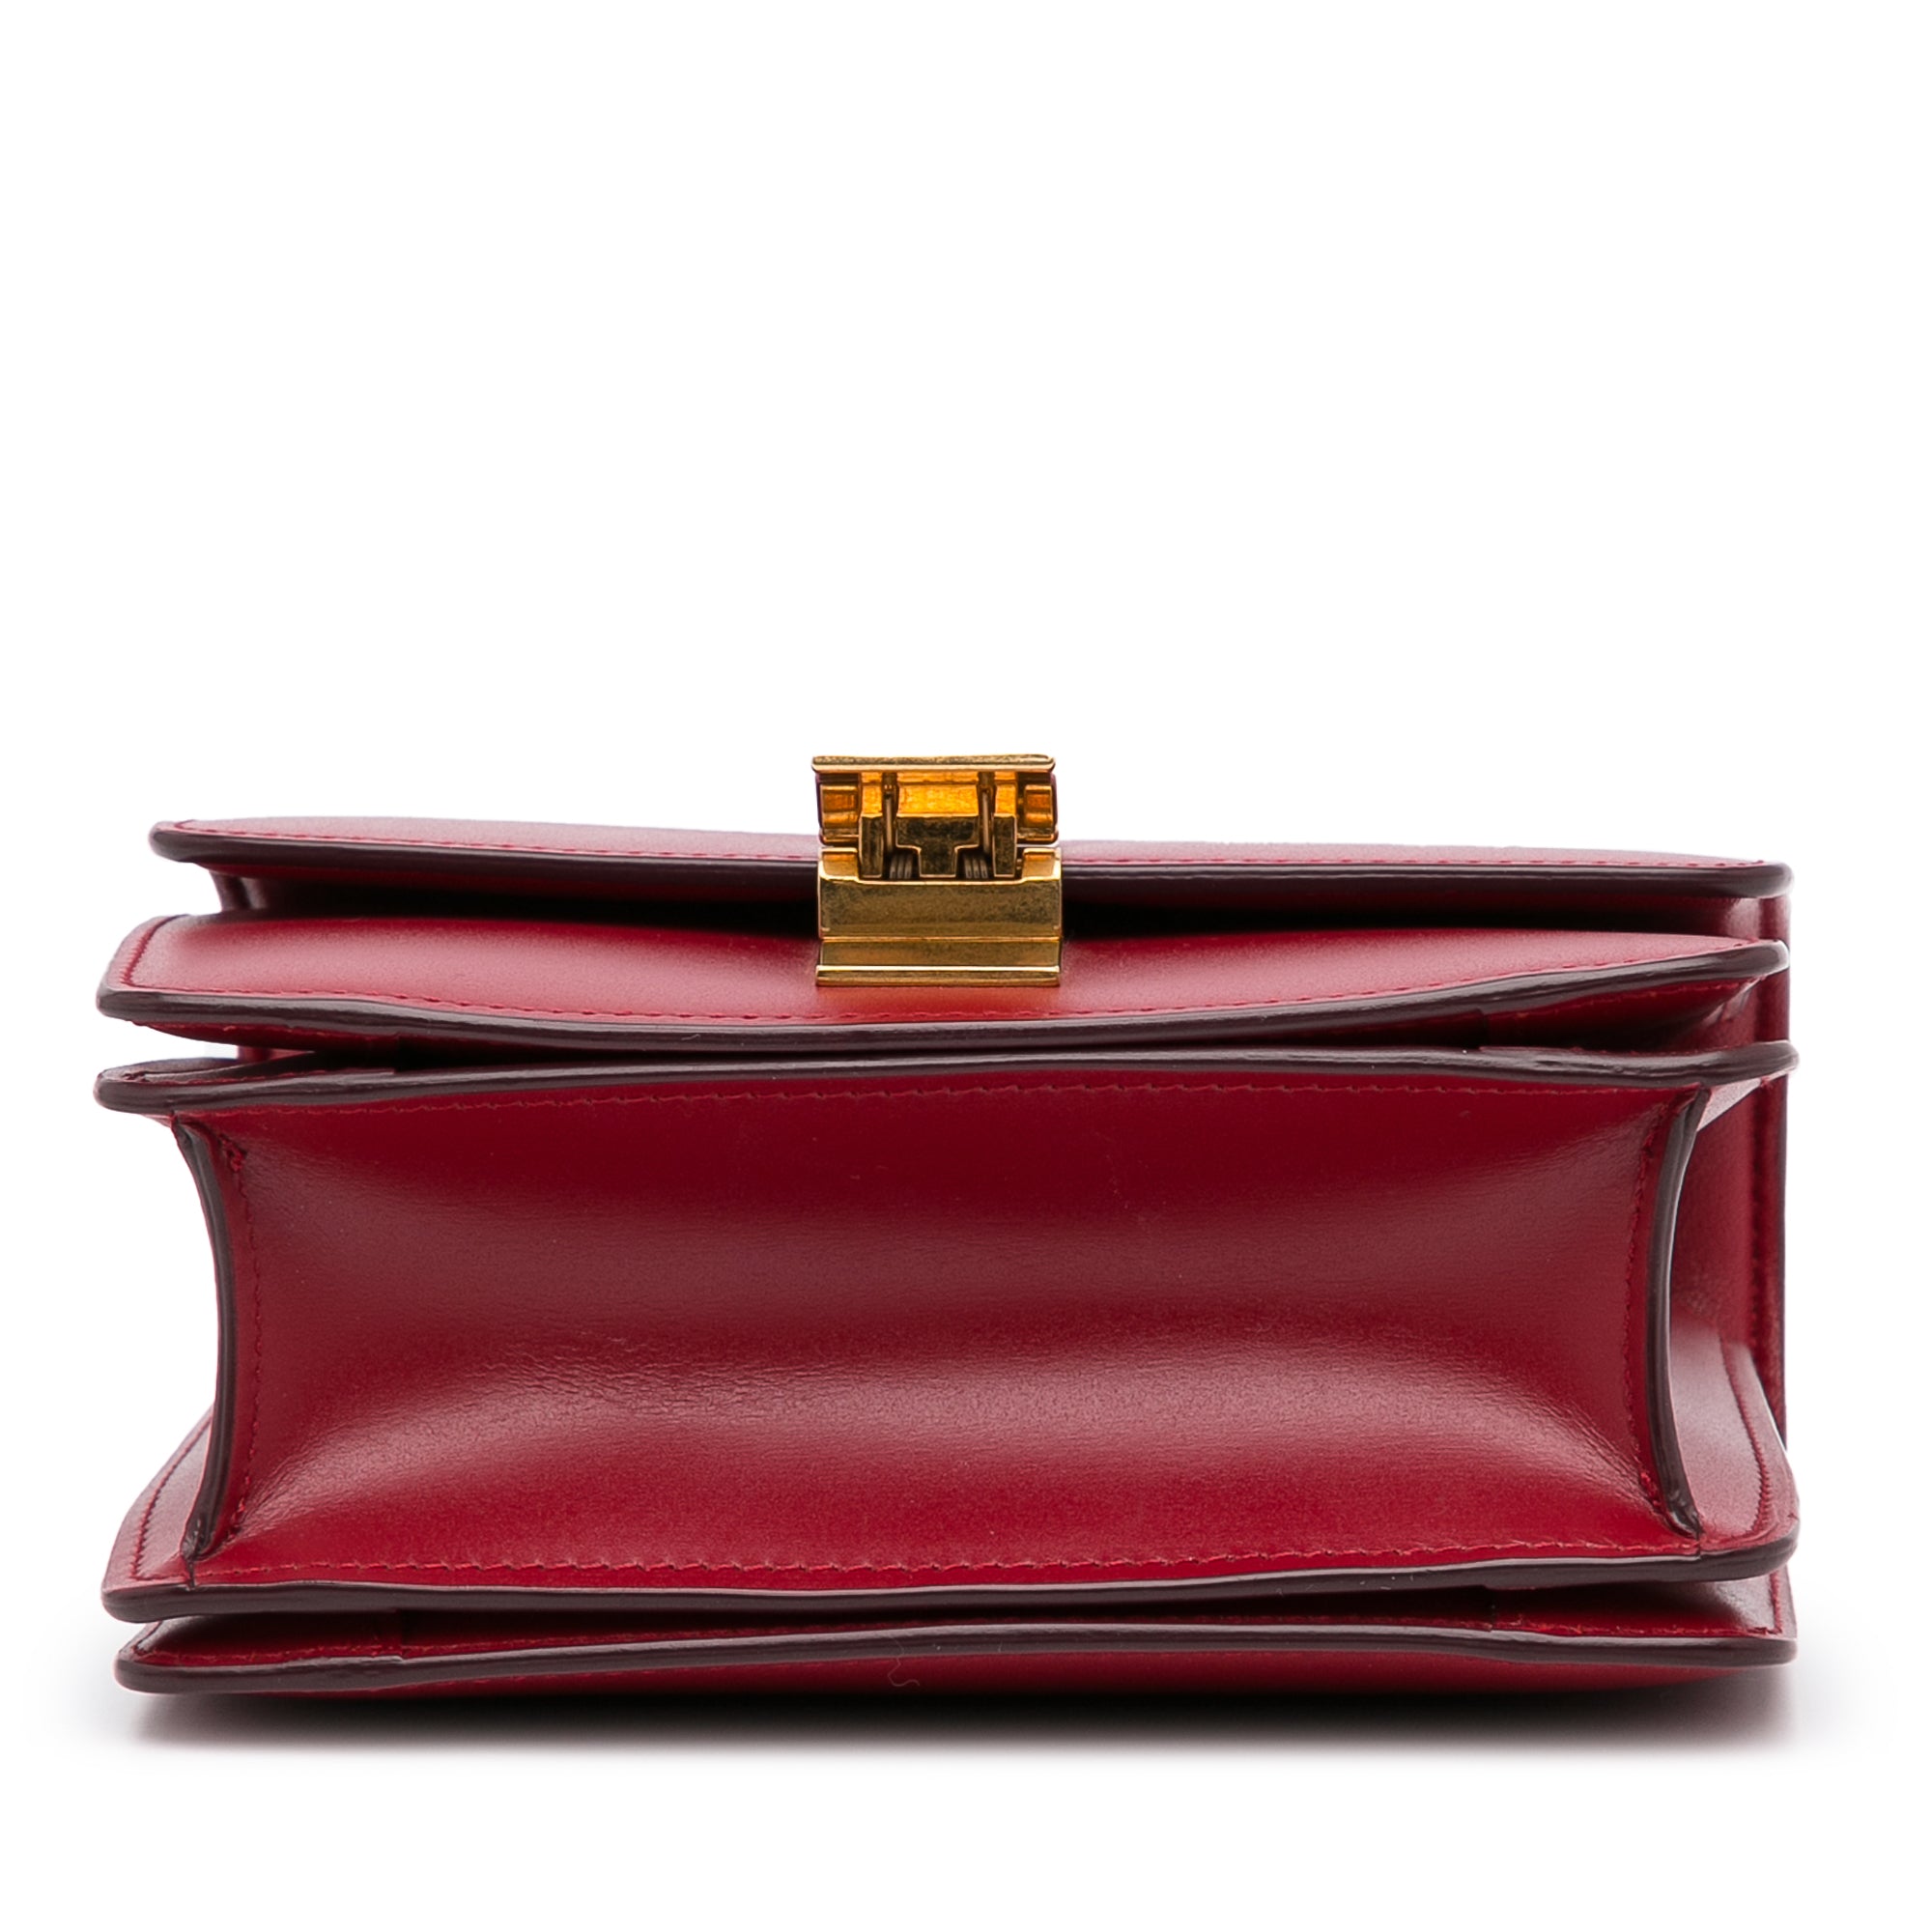 Authentic CELINE Classic Box Bag In Red Burgundy Calfskin